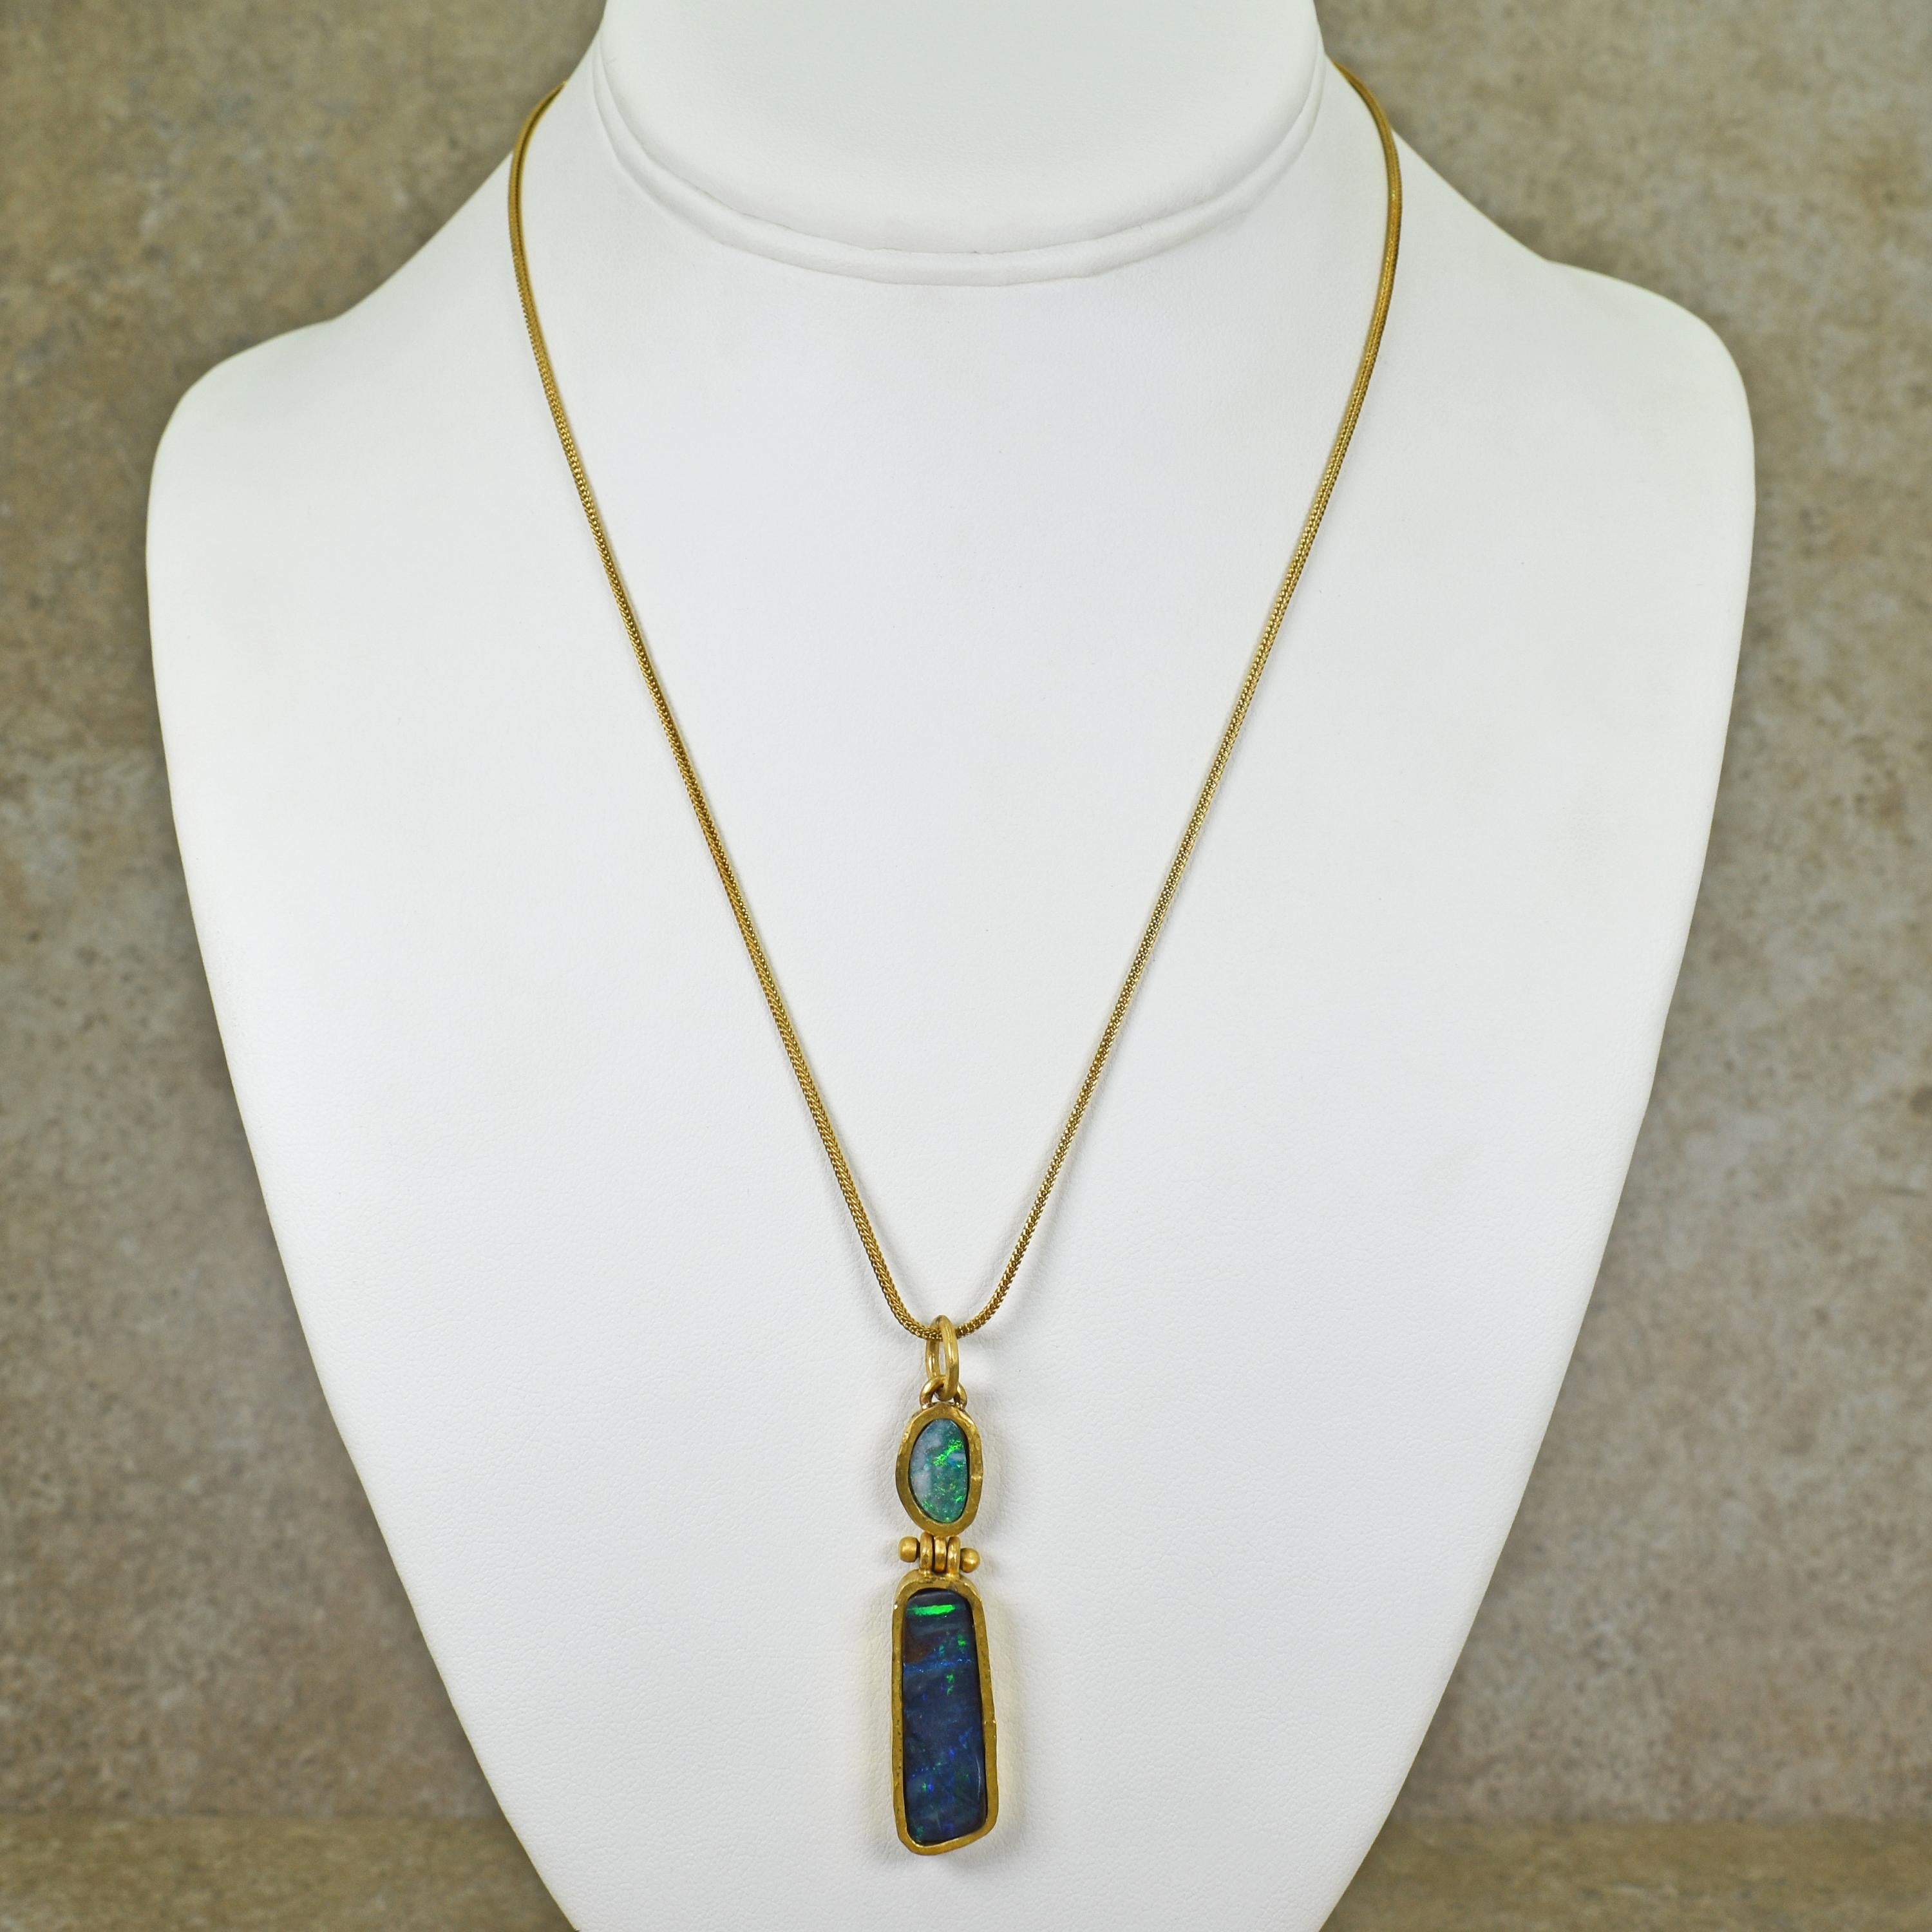 Australian Opals & Forged 22 Karat Gold Hinged Pendant Necklace In New Condition For Sale In Naples, FL